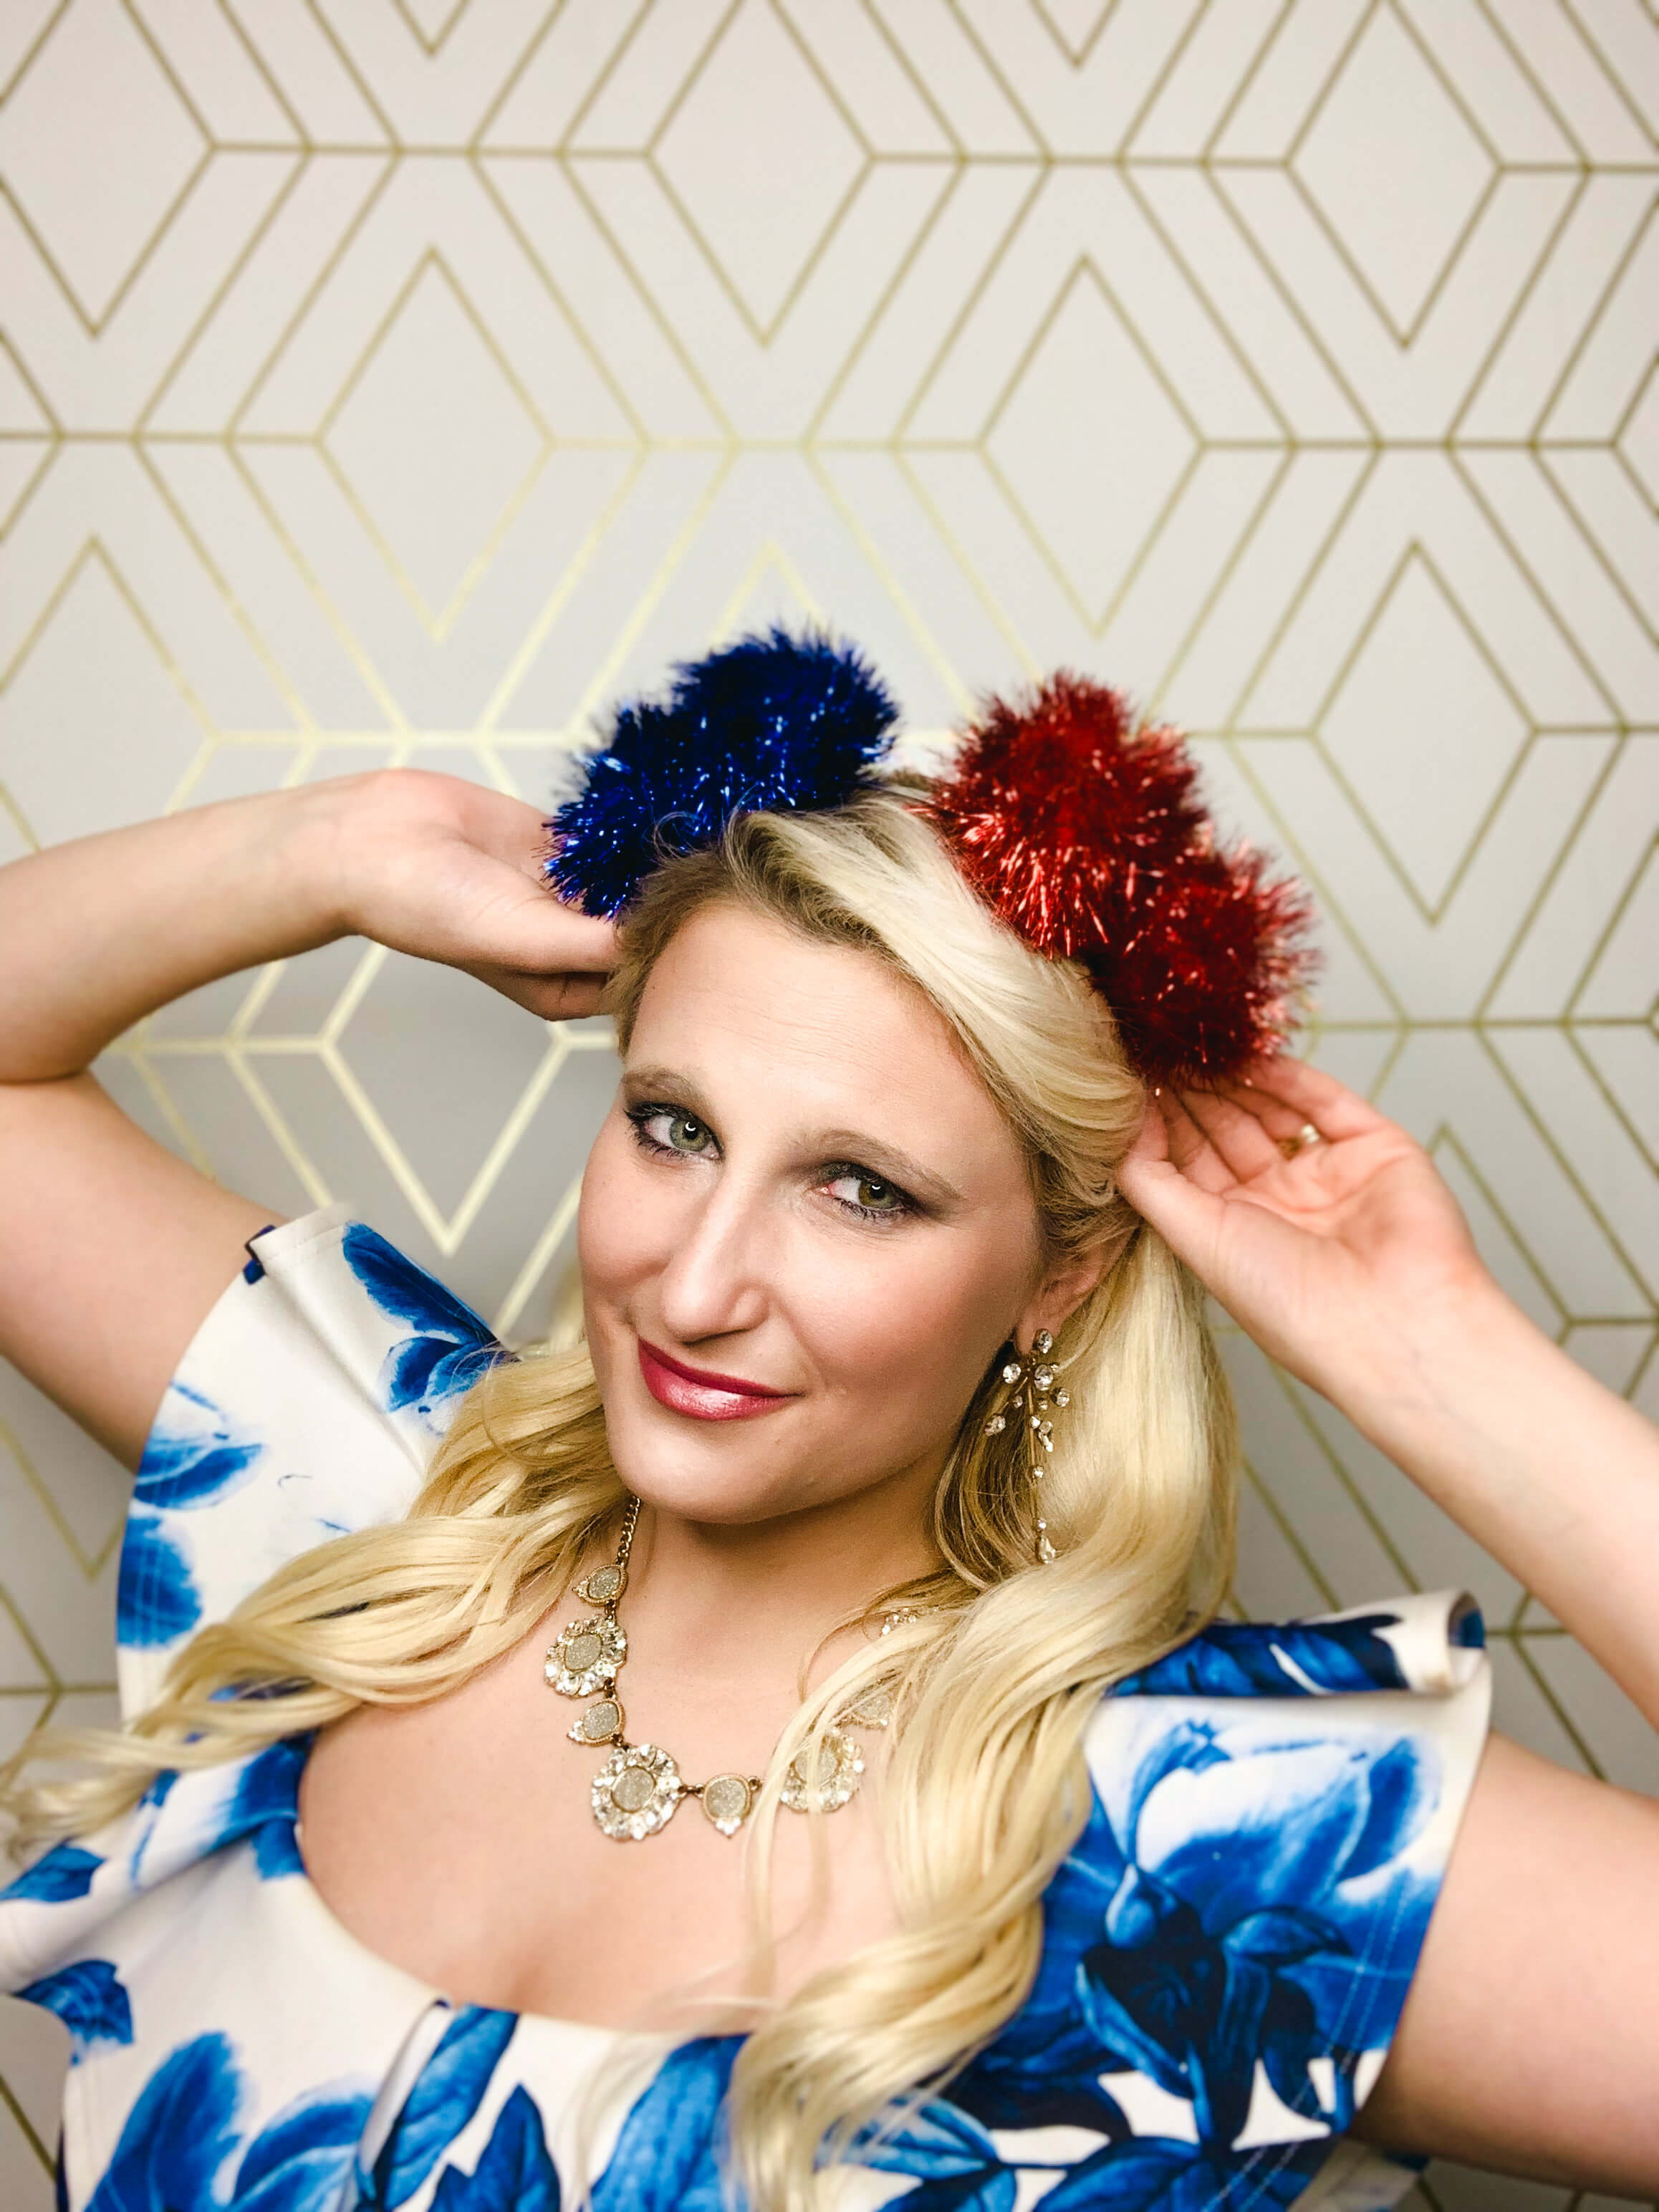 Ole Miss Red & Blue Pom-Poms - Crowned By Ellie